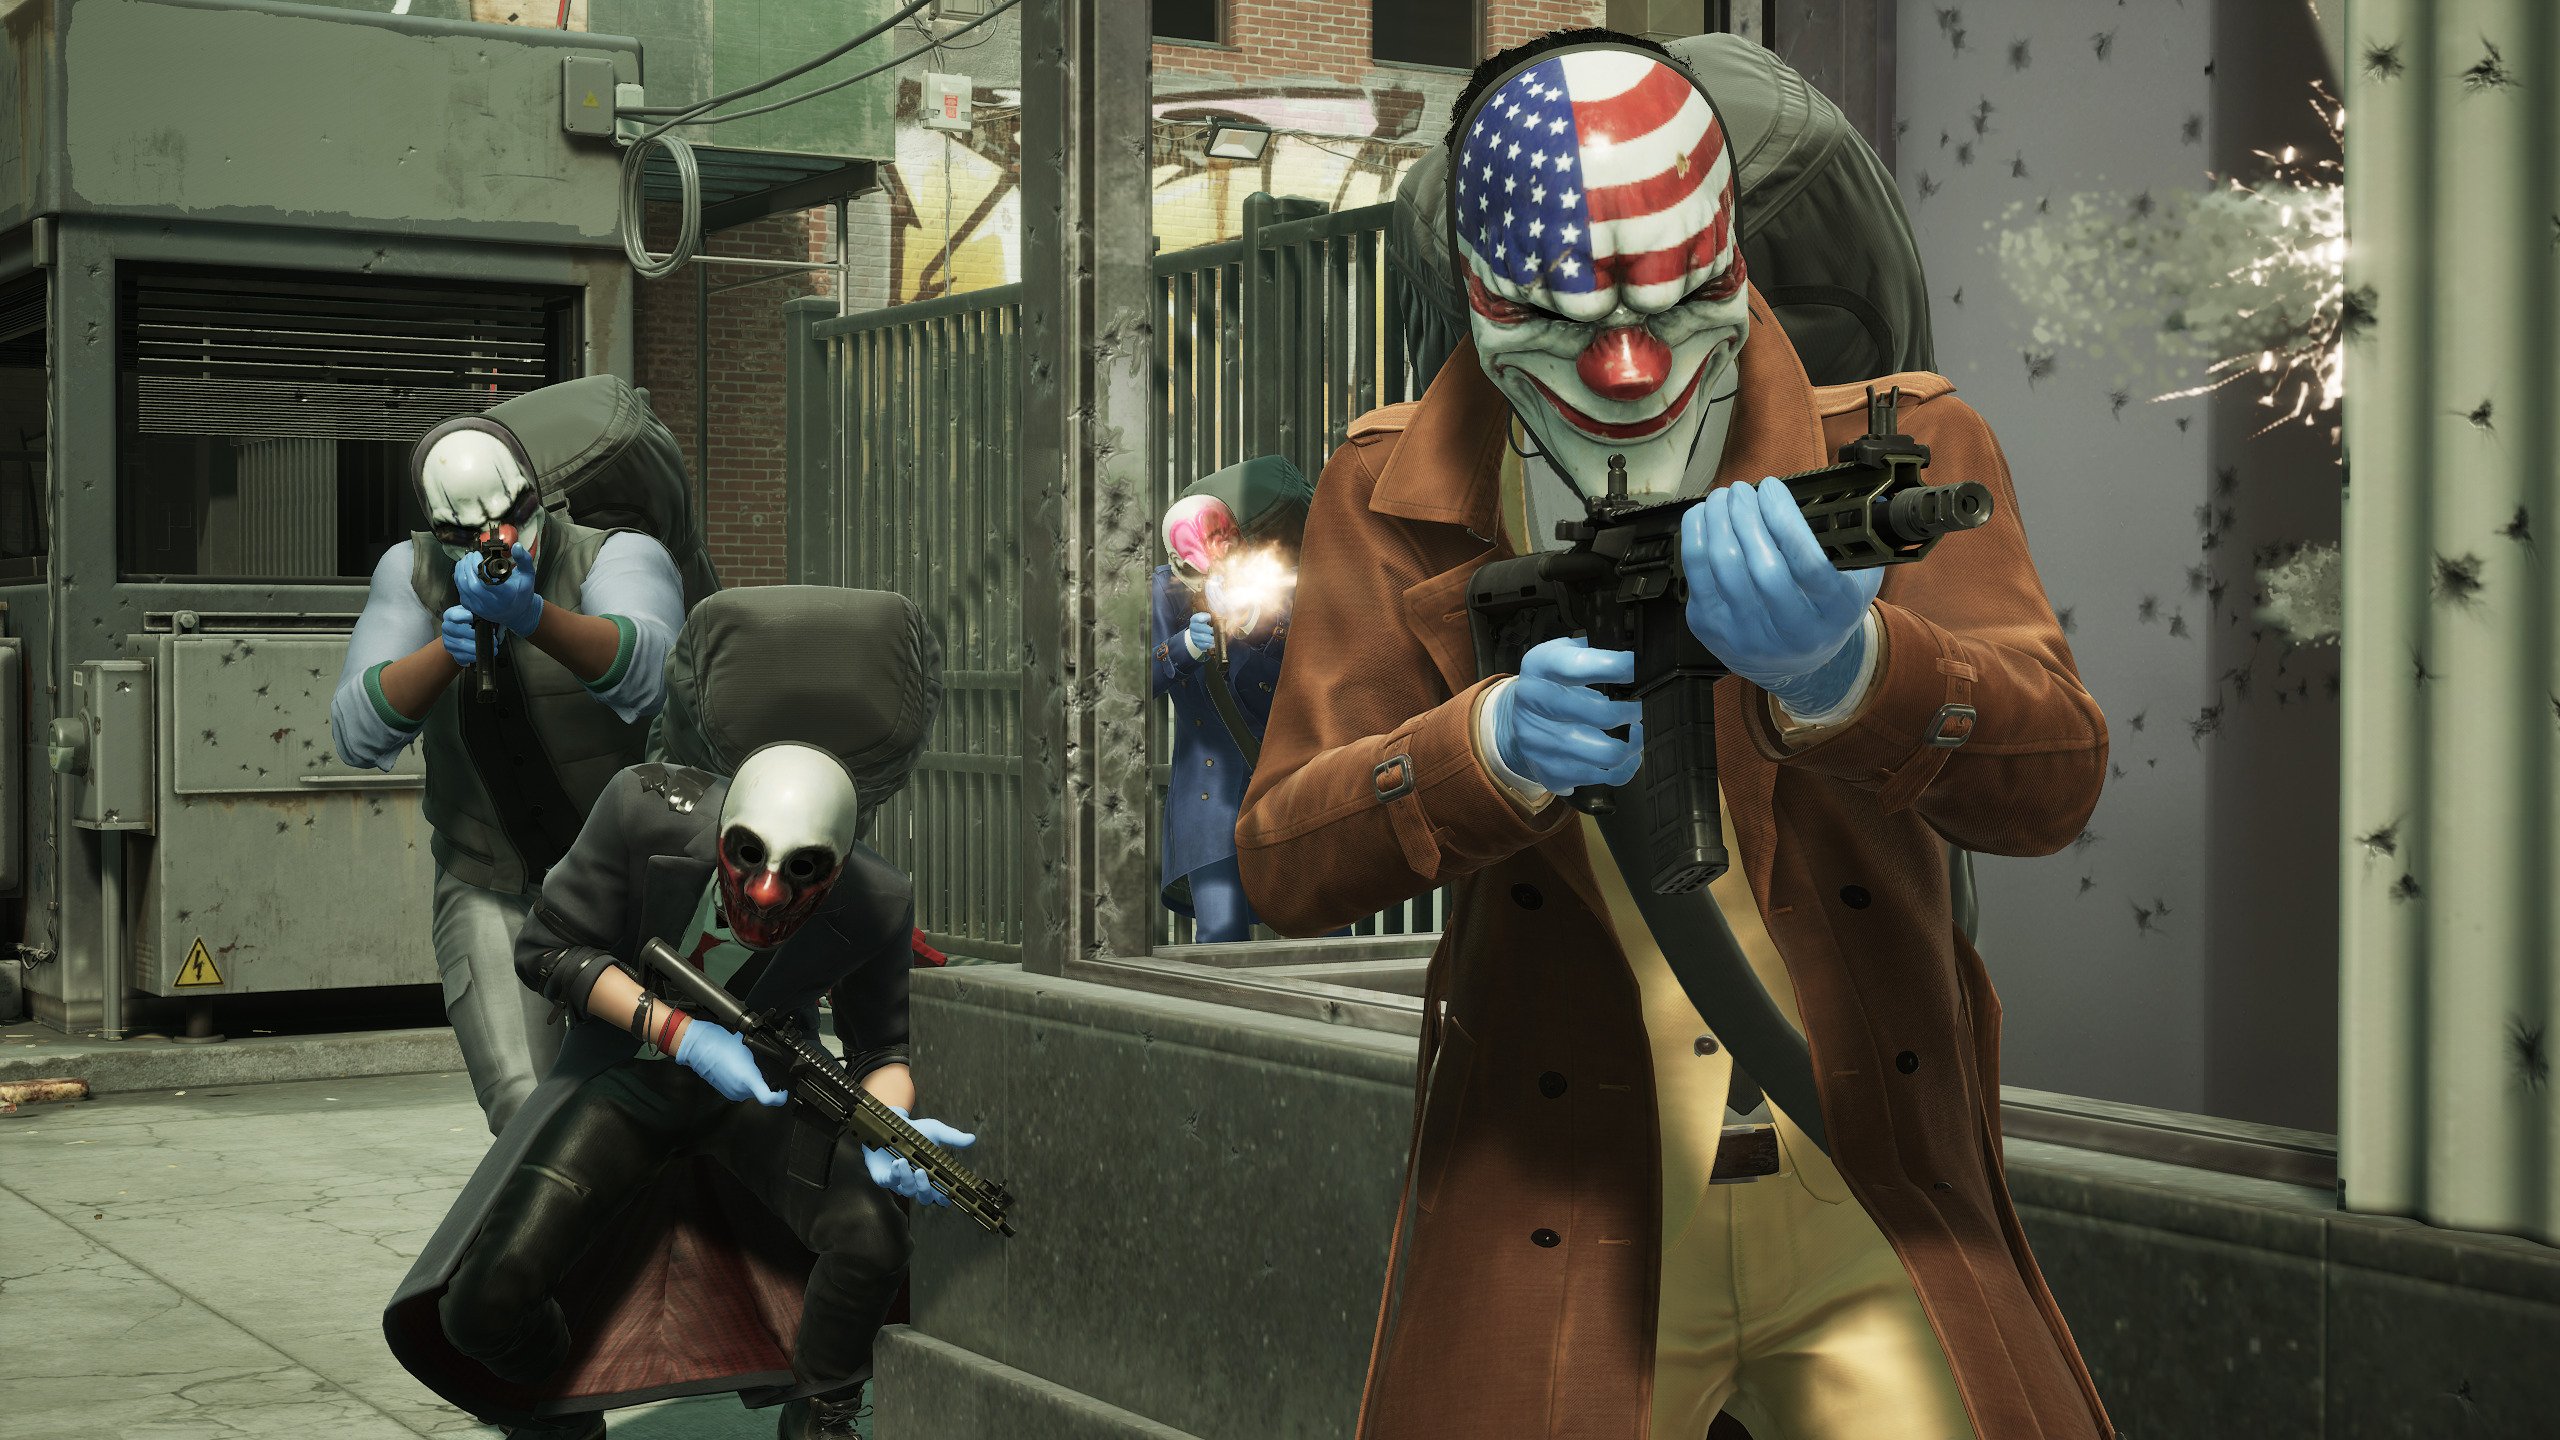 Starbreeze CEO Comments on Payday 3 Server Issues